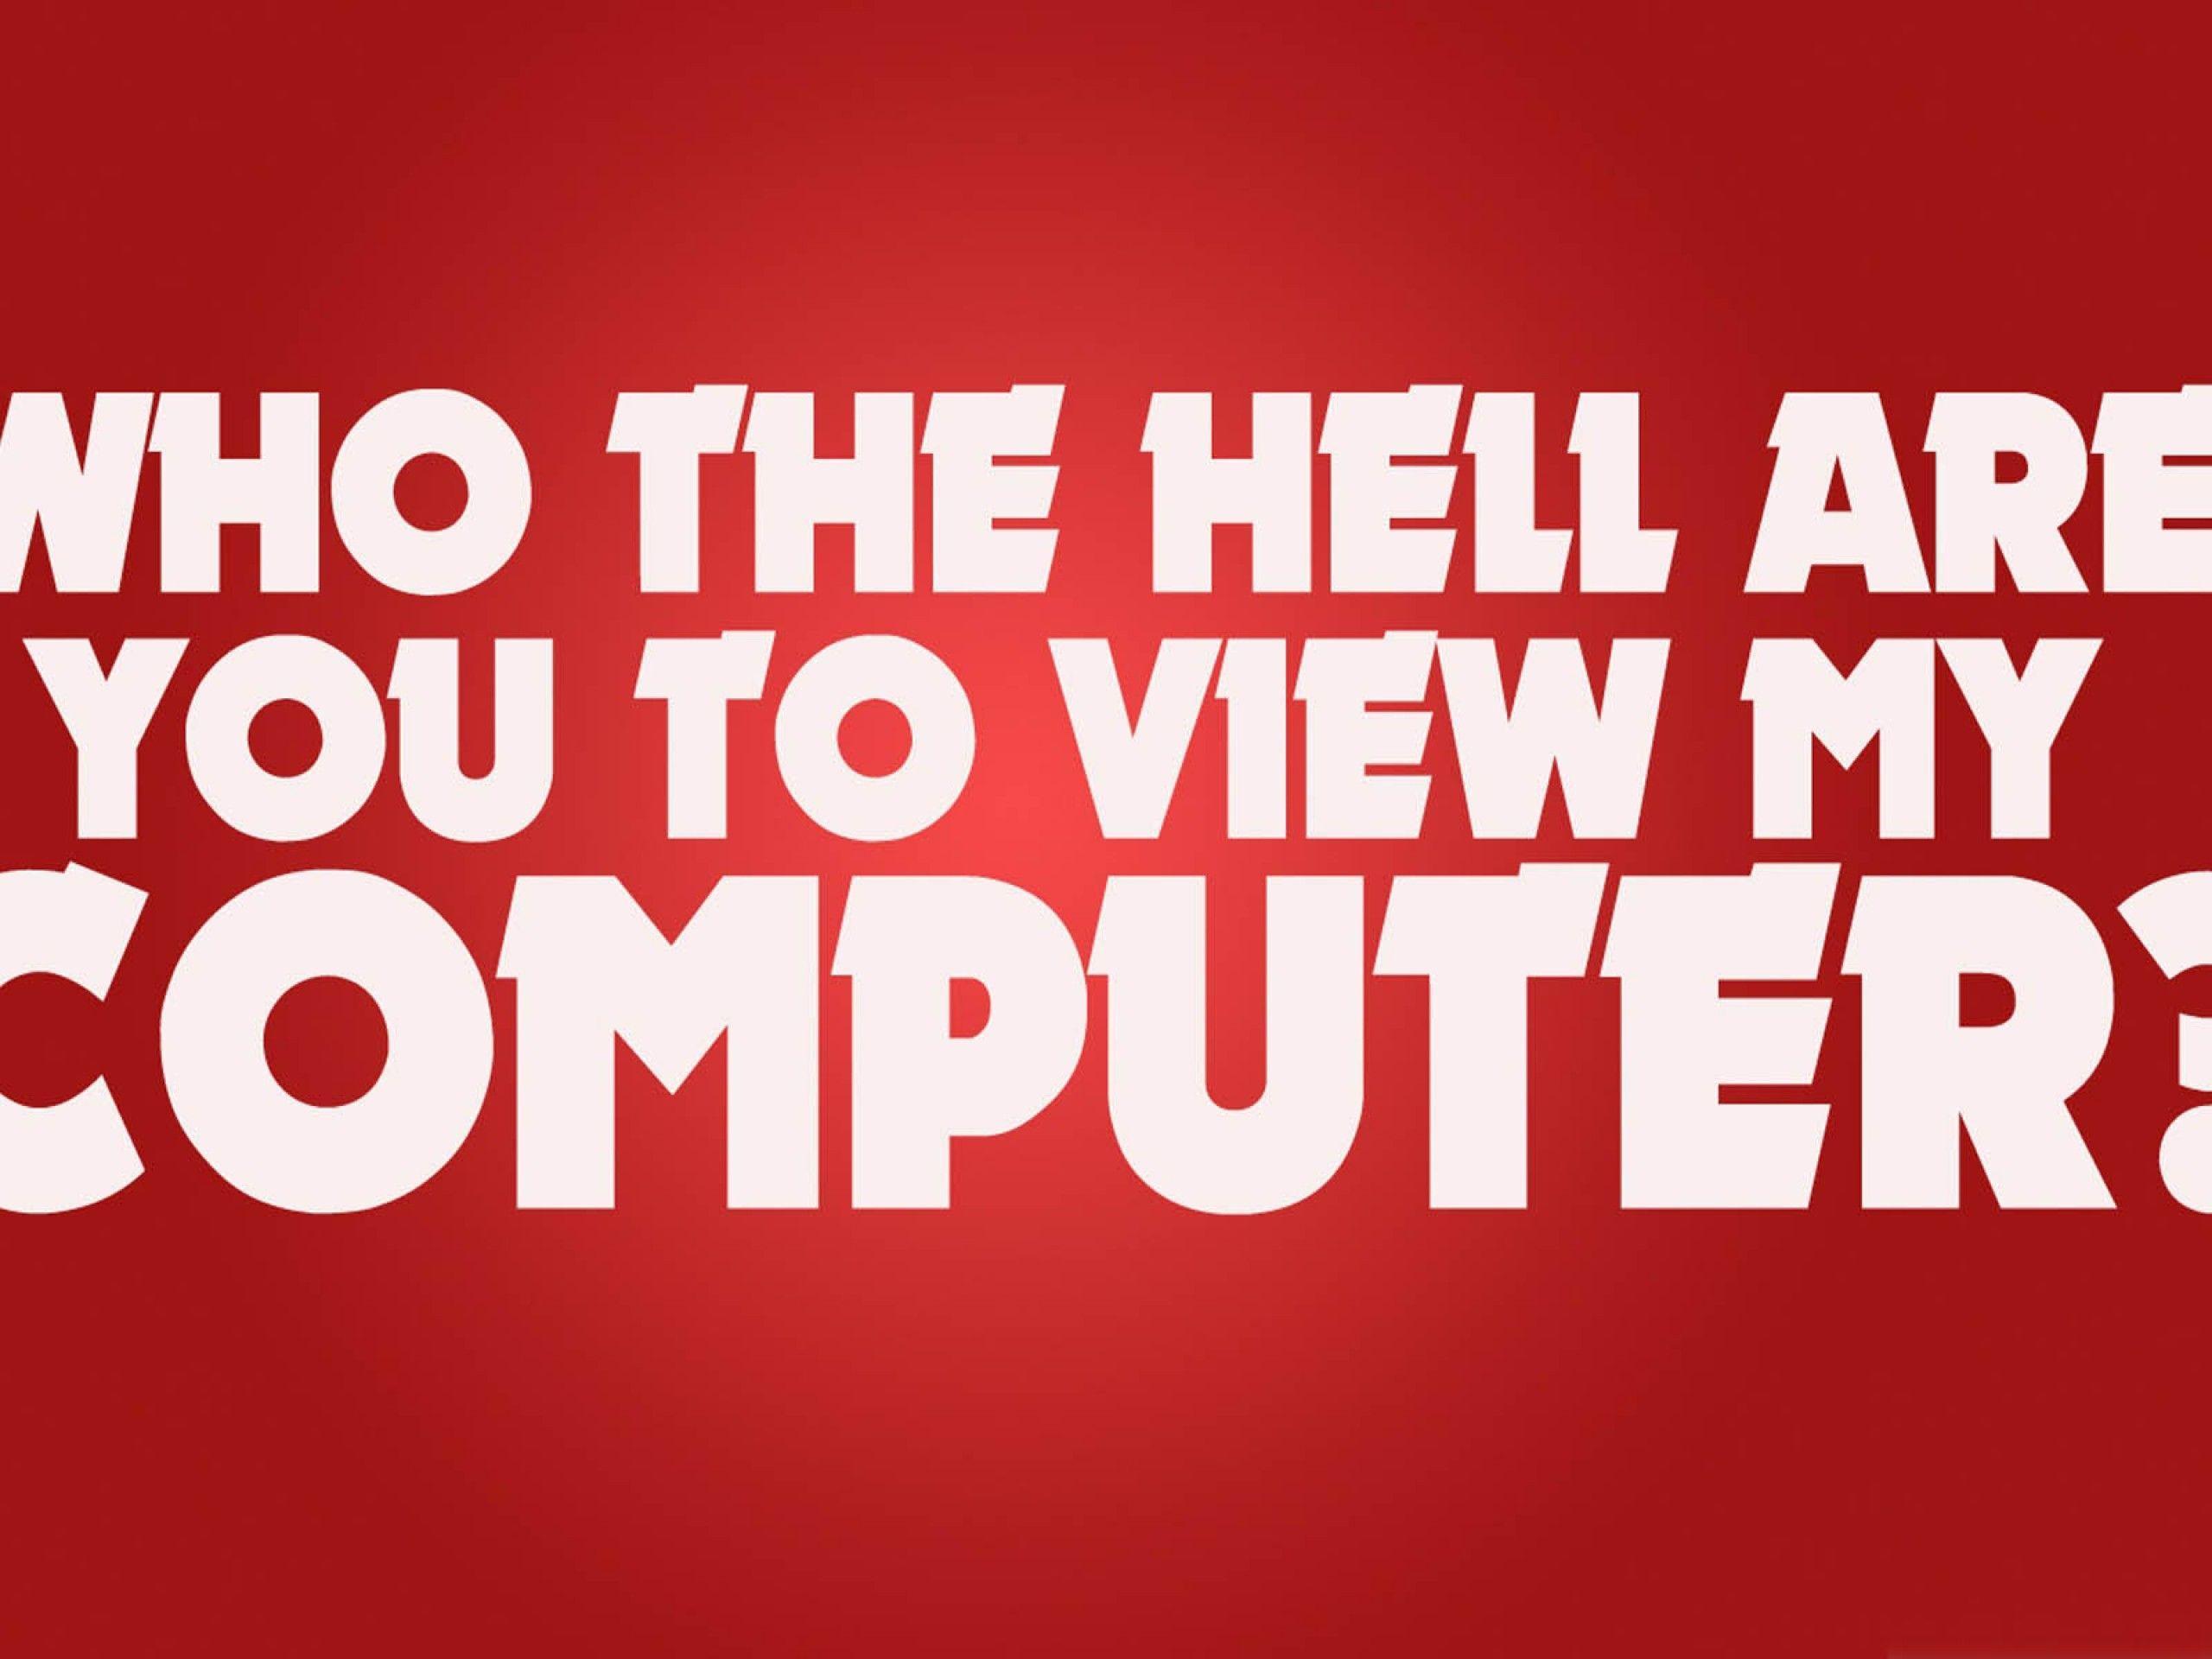 Who the hell are you to view my computer download free wallpaper